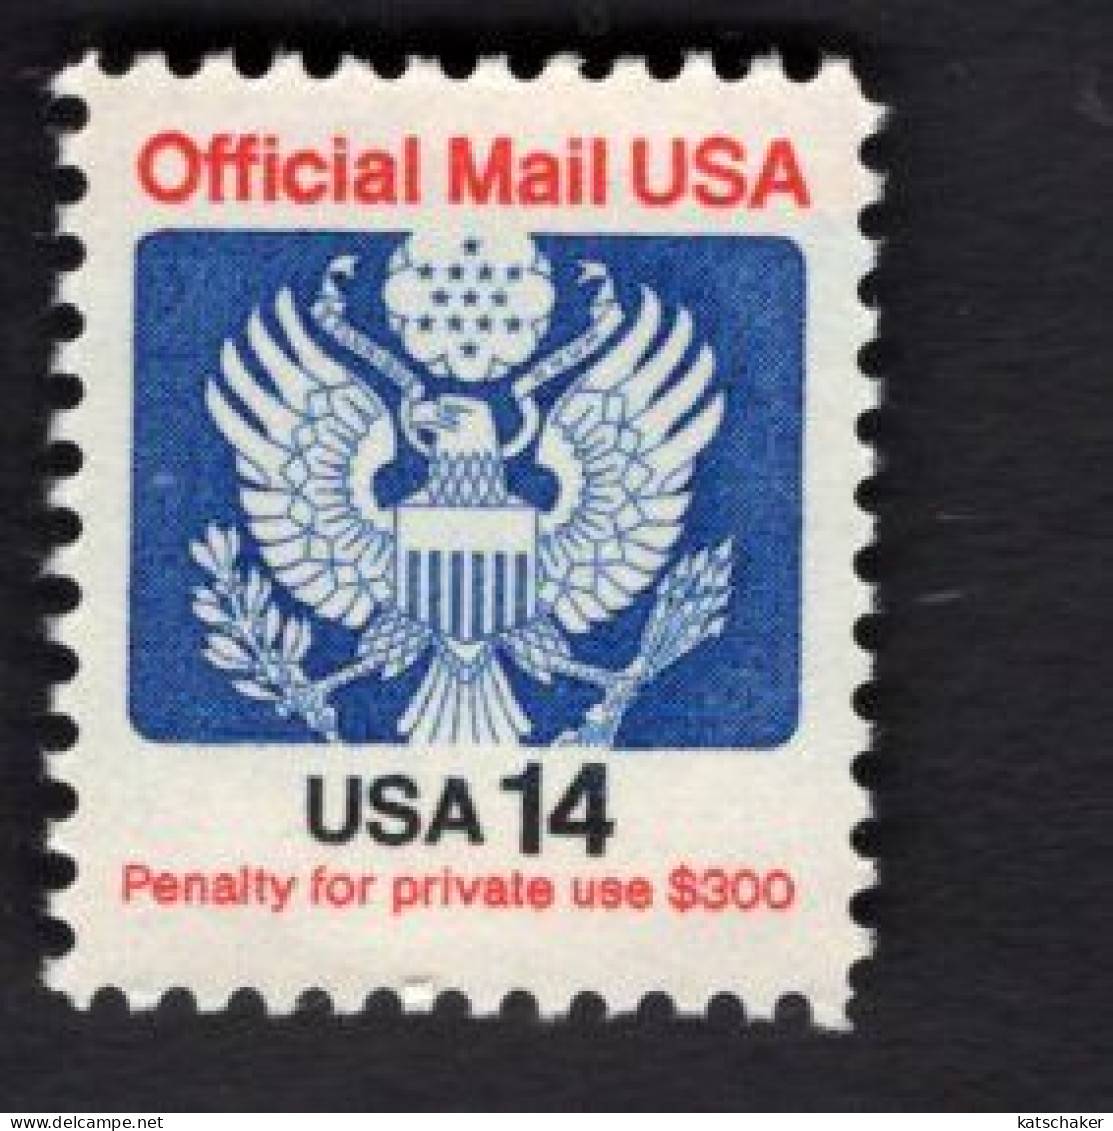 2008963262  1985 (XX) SCOTT O129a POSTFRIS MINT NEVER HINGED Eagle And Shield Bird Vogel OFFICIAL MAIL - Officials